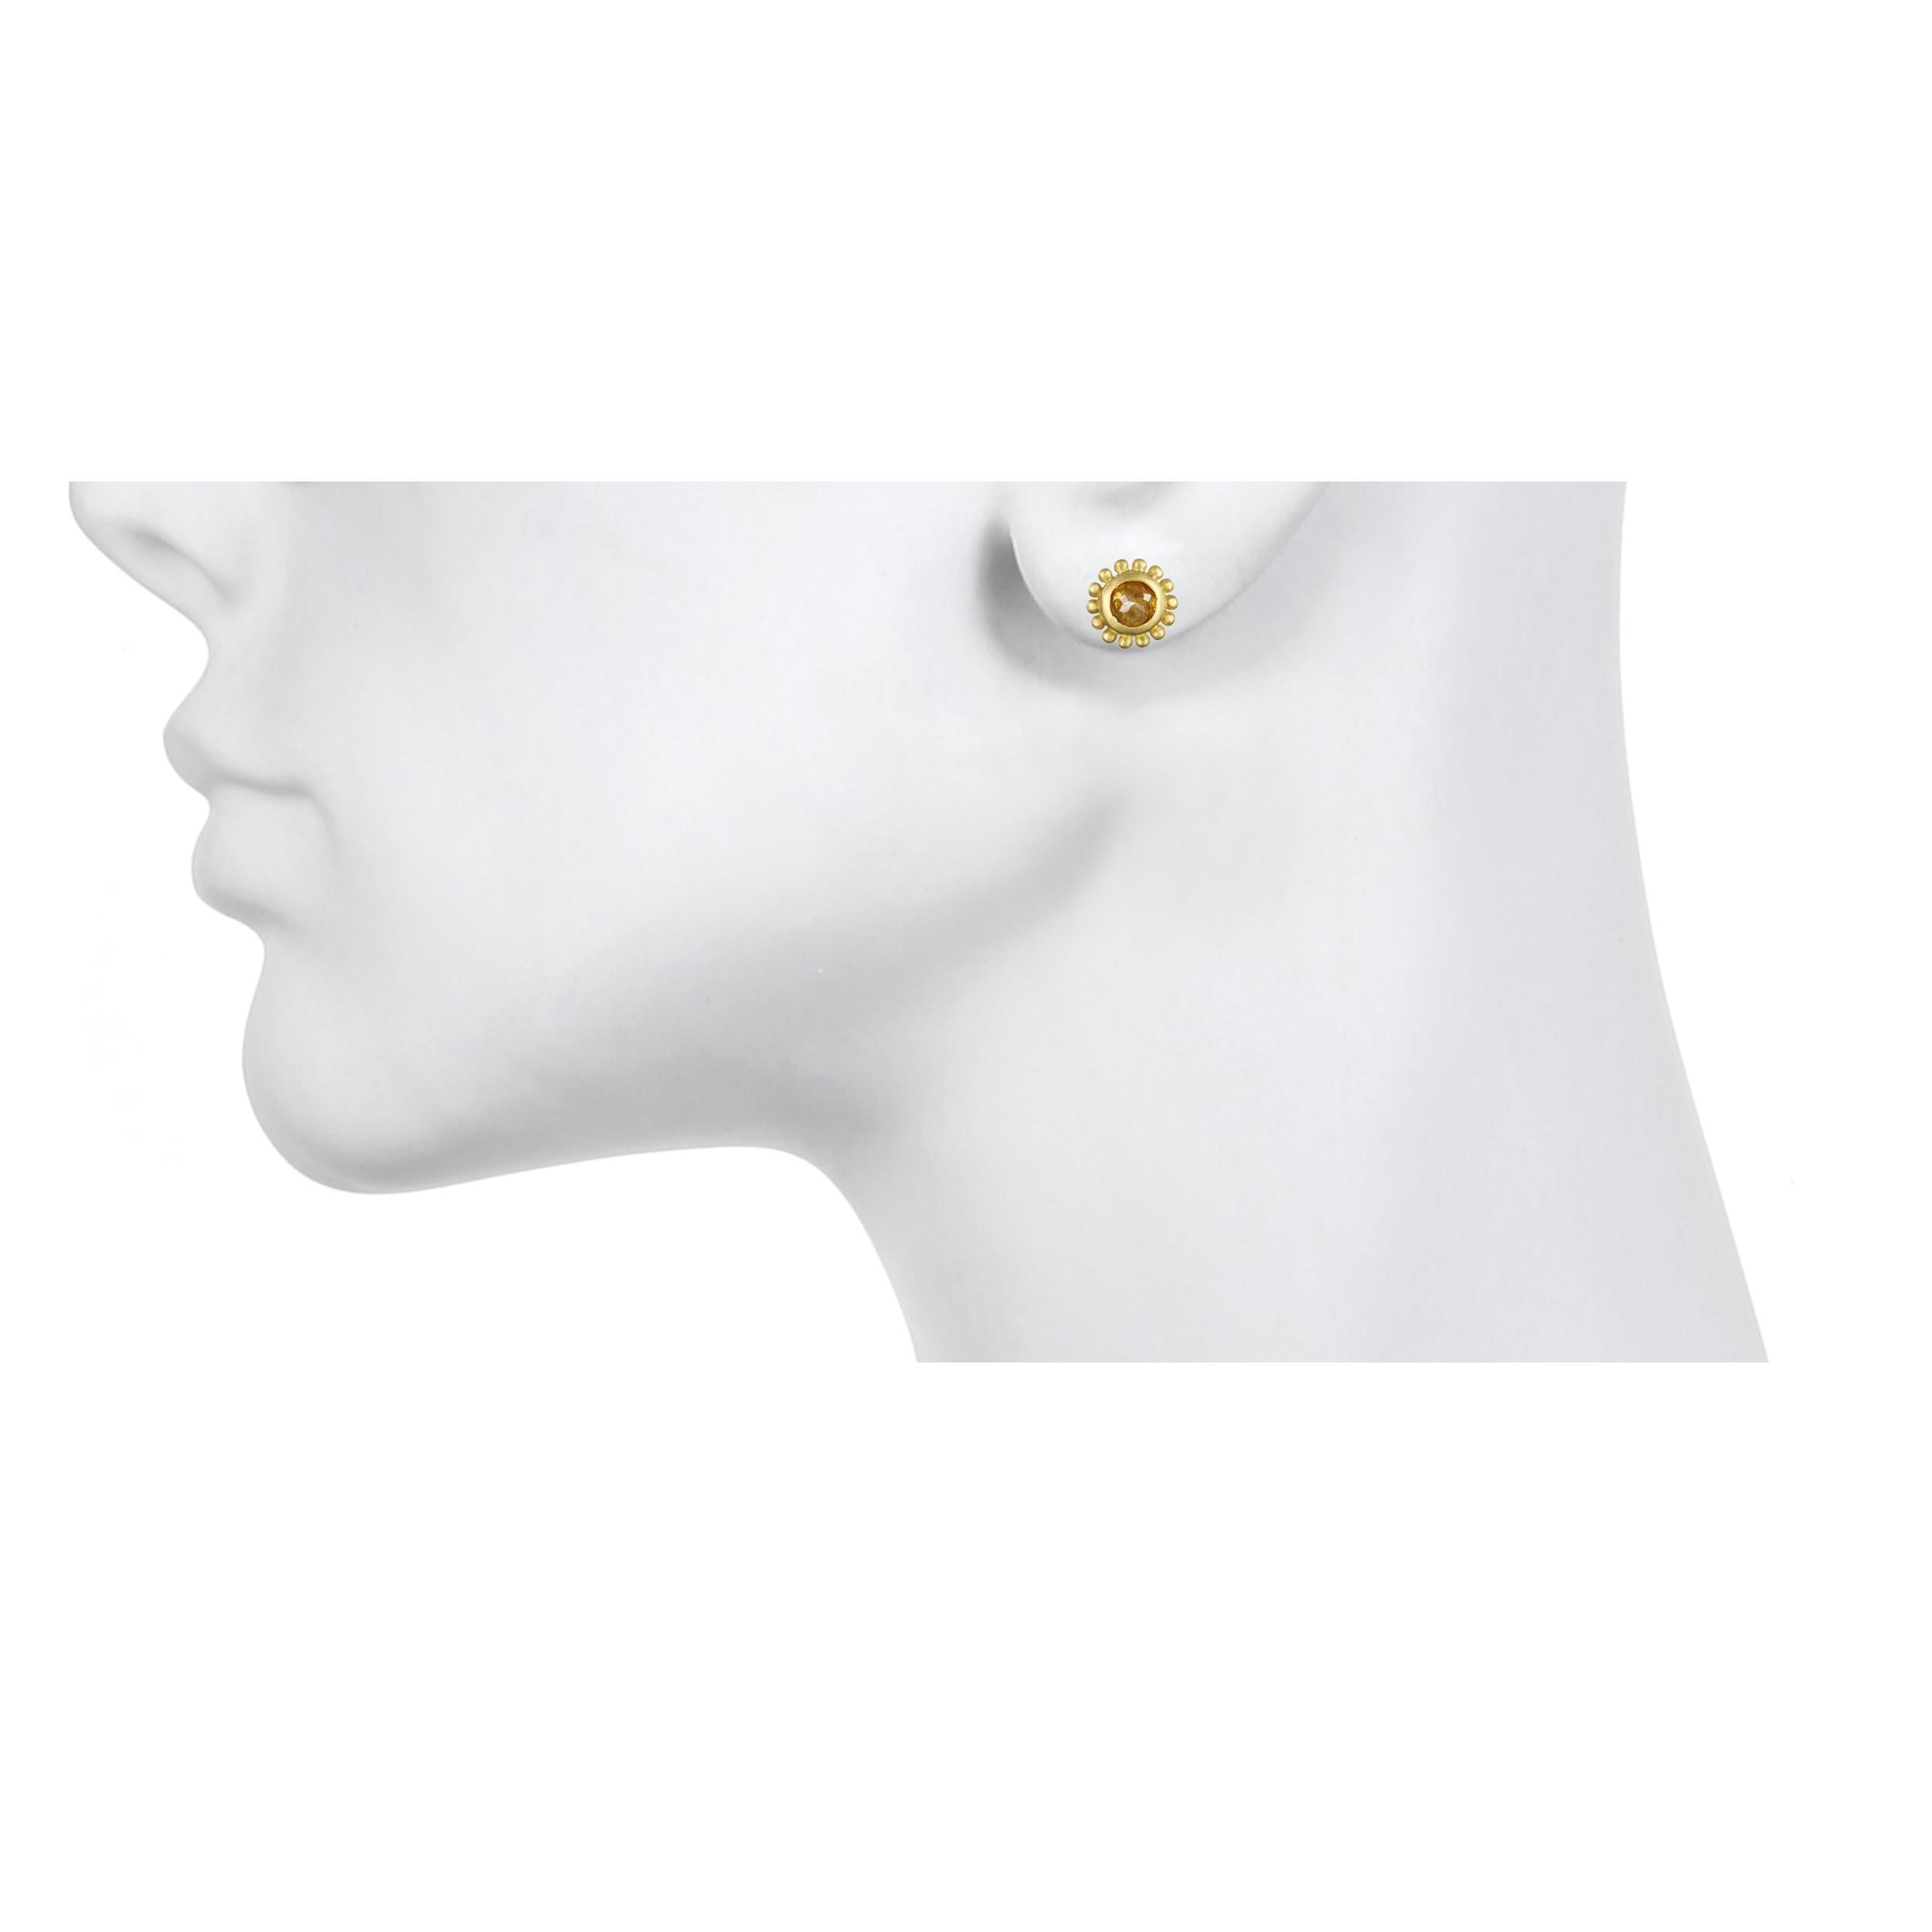 Handcrafted in 18k gold, Faye Kim’s modern design conveys understated elegance and a truly stylish, everyday look. Complete with yellow/green milky diamond centers and granulation detail, these studs have a unique and organic feel.

Milky Diamonds =